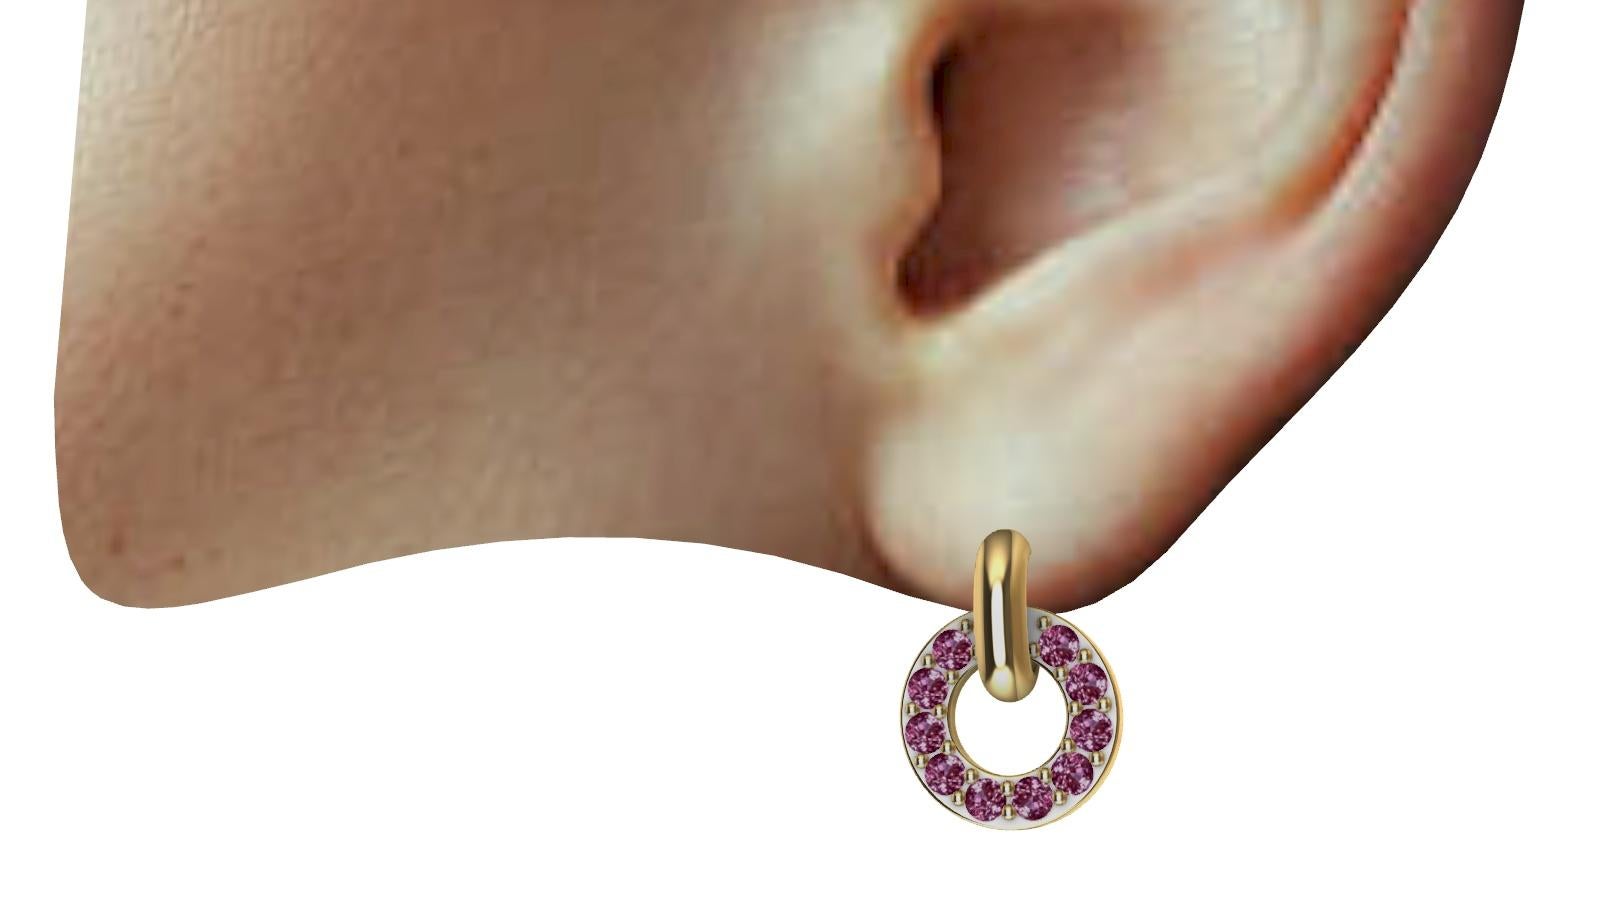  18 Karat Yellow Gold Diamond Cut Pink Sapphires Petite Dangle Earrings, These are petite. The hoop earring 14mm x 10.5 mm diameter. Tiny but mighty. All day elegance, day into evening no problem.  These are Pink sapphires , diamond cut  2.0 mm ,